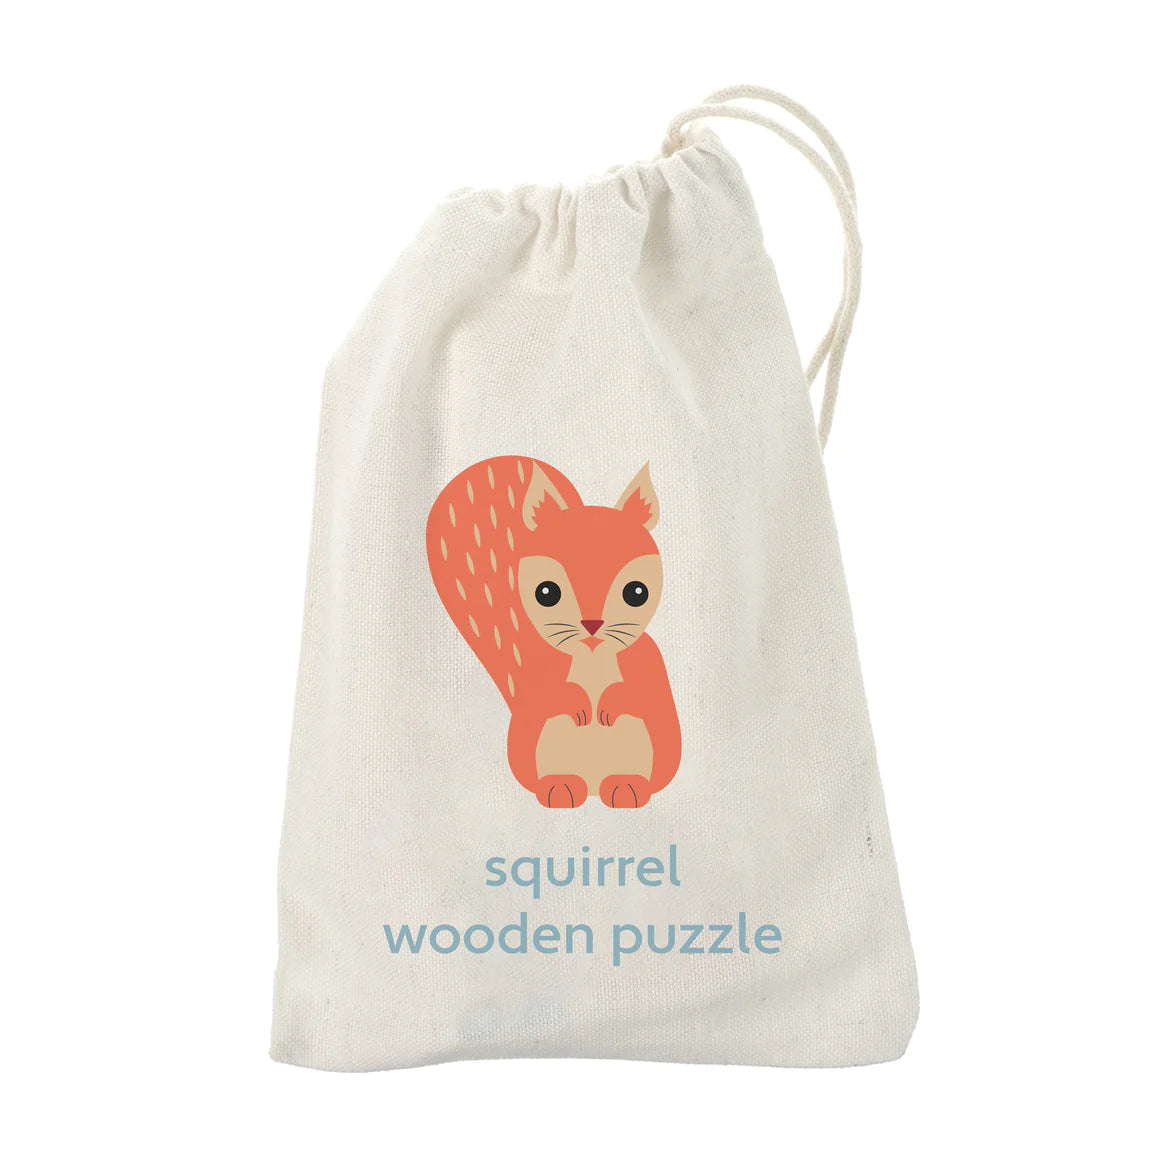 Wooden Squirrel Puzzle by Orange Tree Toys